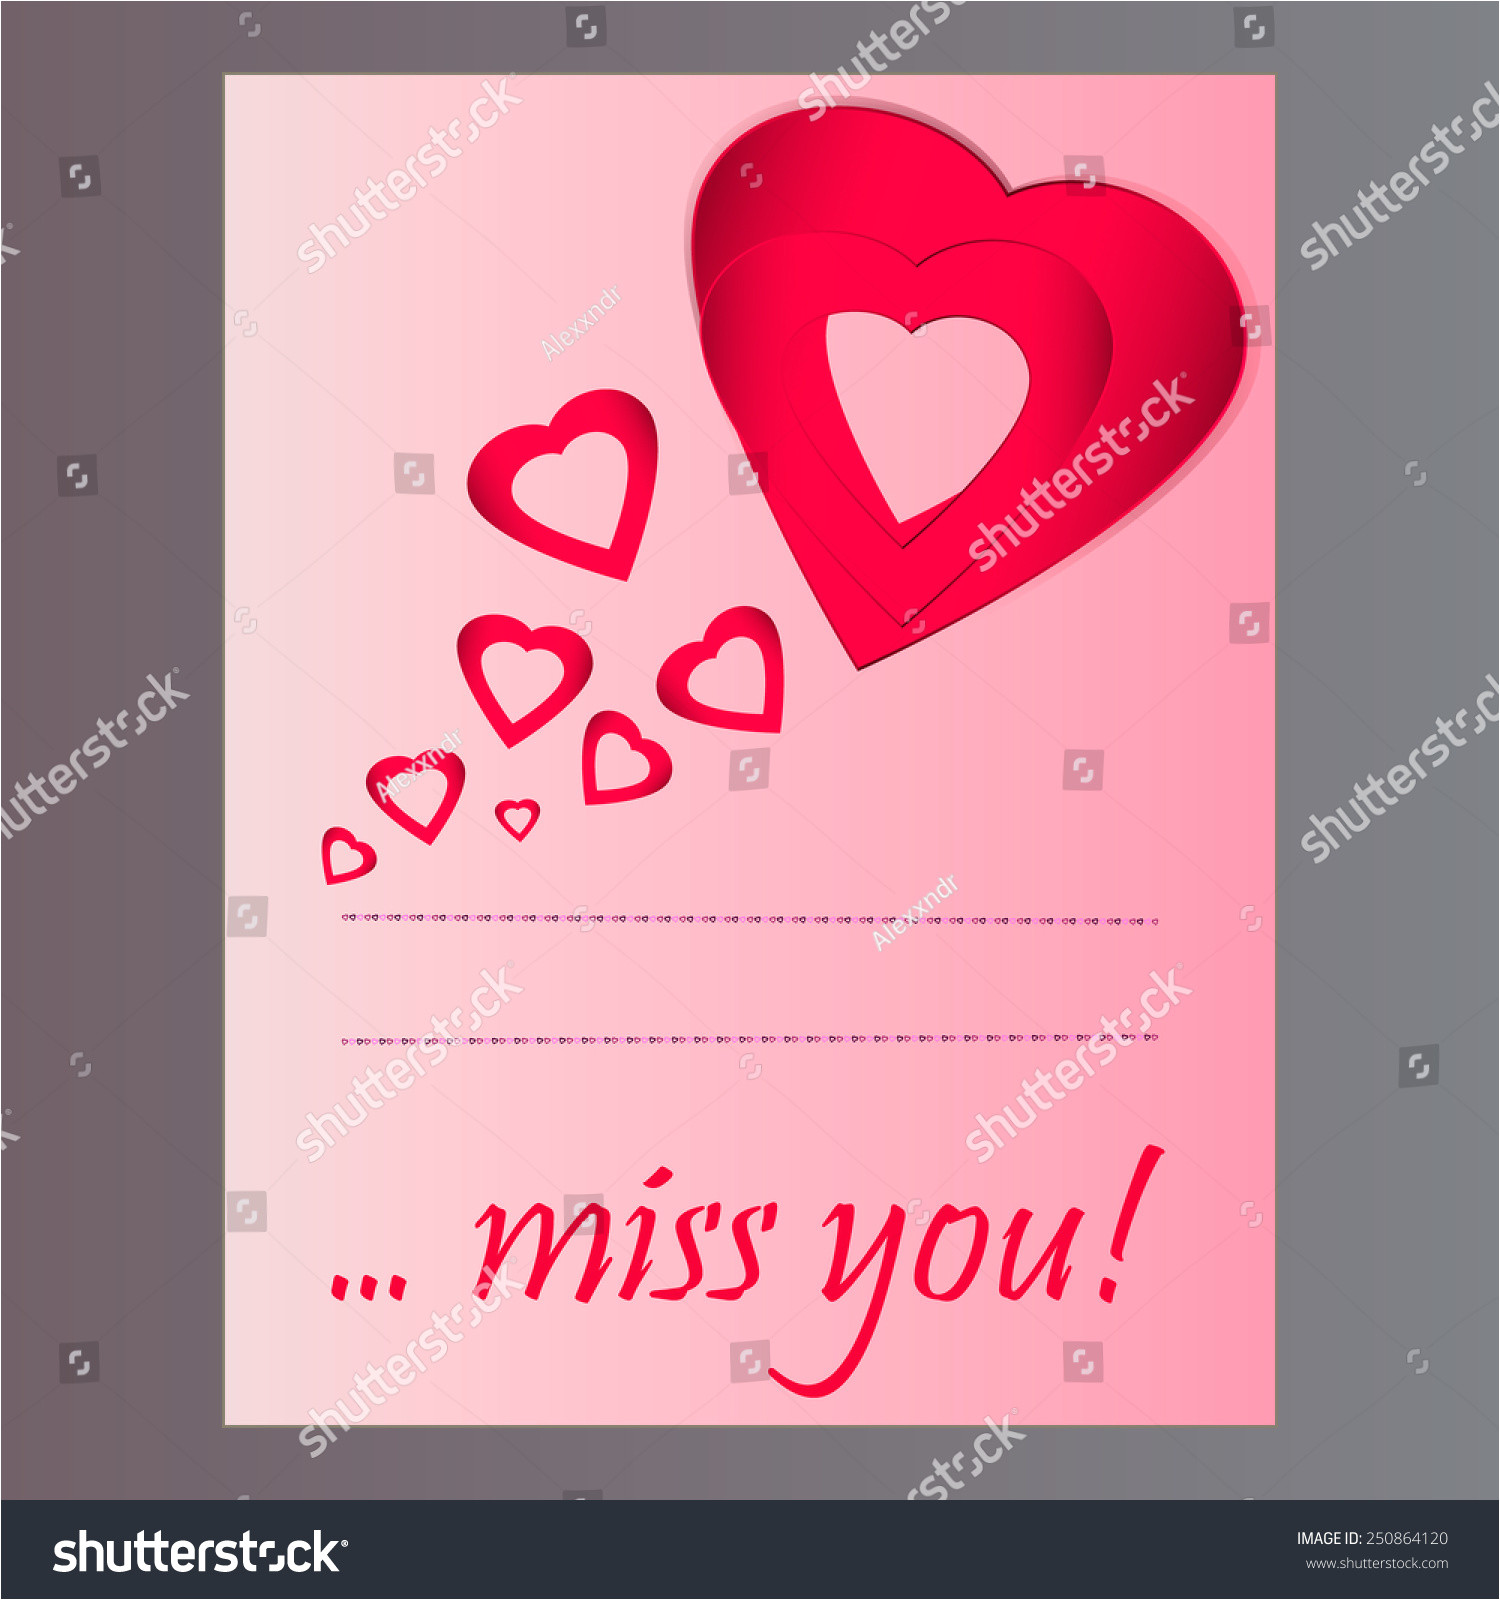 stock vector greeting card for valentine s day with words miss you 250864120 jpg